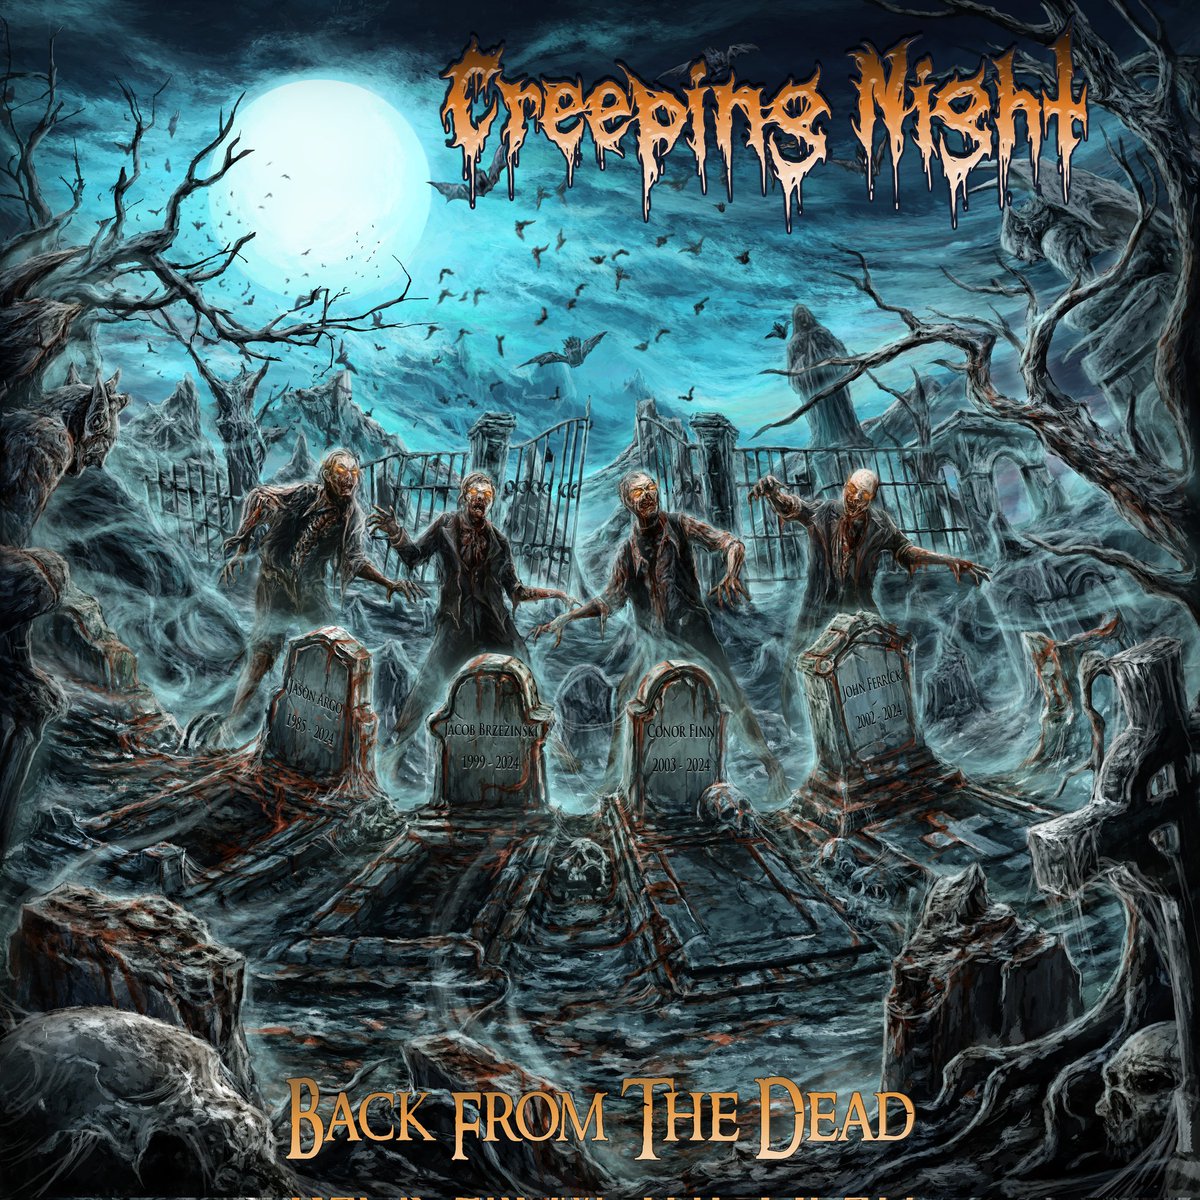 🚨 CREEPING NIGHT'S DEBUT ALBUM 'BACK FROM THE DEAD' OUT JUNE 21ST!🚨
Pre-save links & CDs coming soon!
#creepingnight #detroitrockcity #music #newrelease #debutalbum #core #metal #rock #shock #selfreleased #diy #slipknot #motionlessinwhite #robzombie #michigan #supportlocalmusic